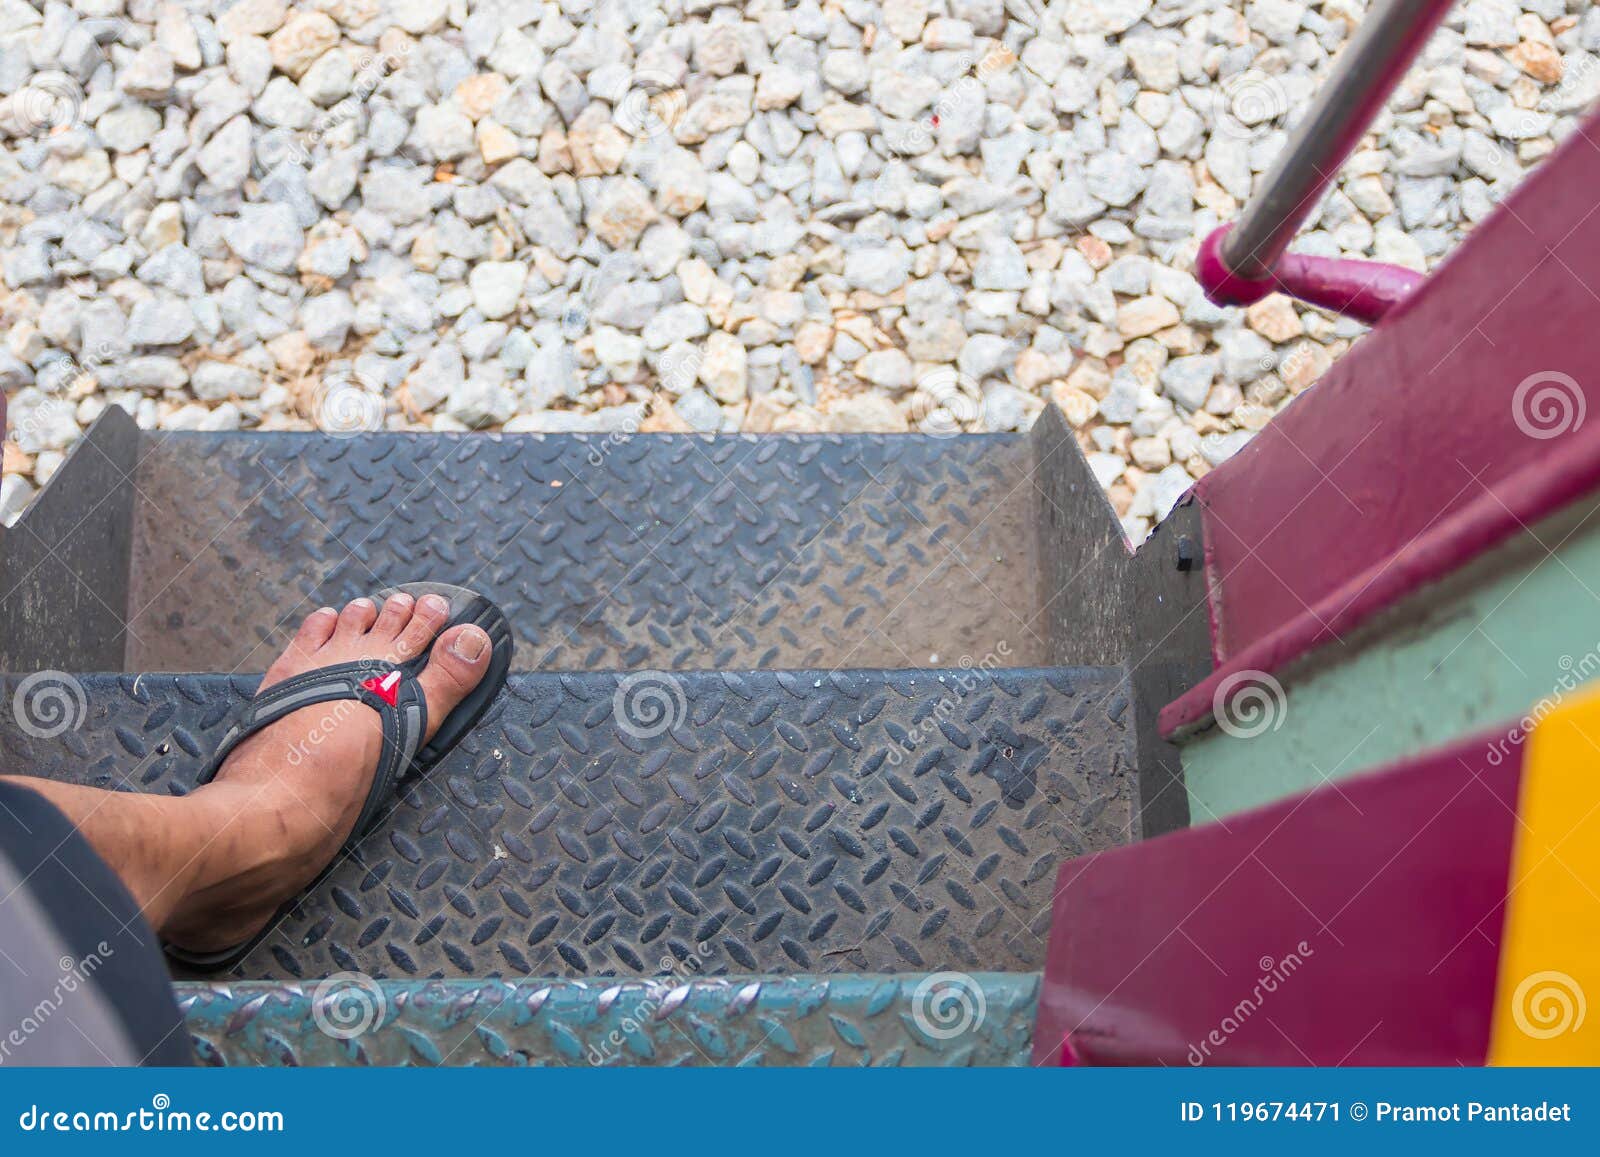 Foot on Steel Stair Up and Down of Train Stock Image - Image of beauty ...